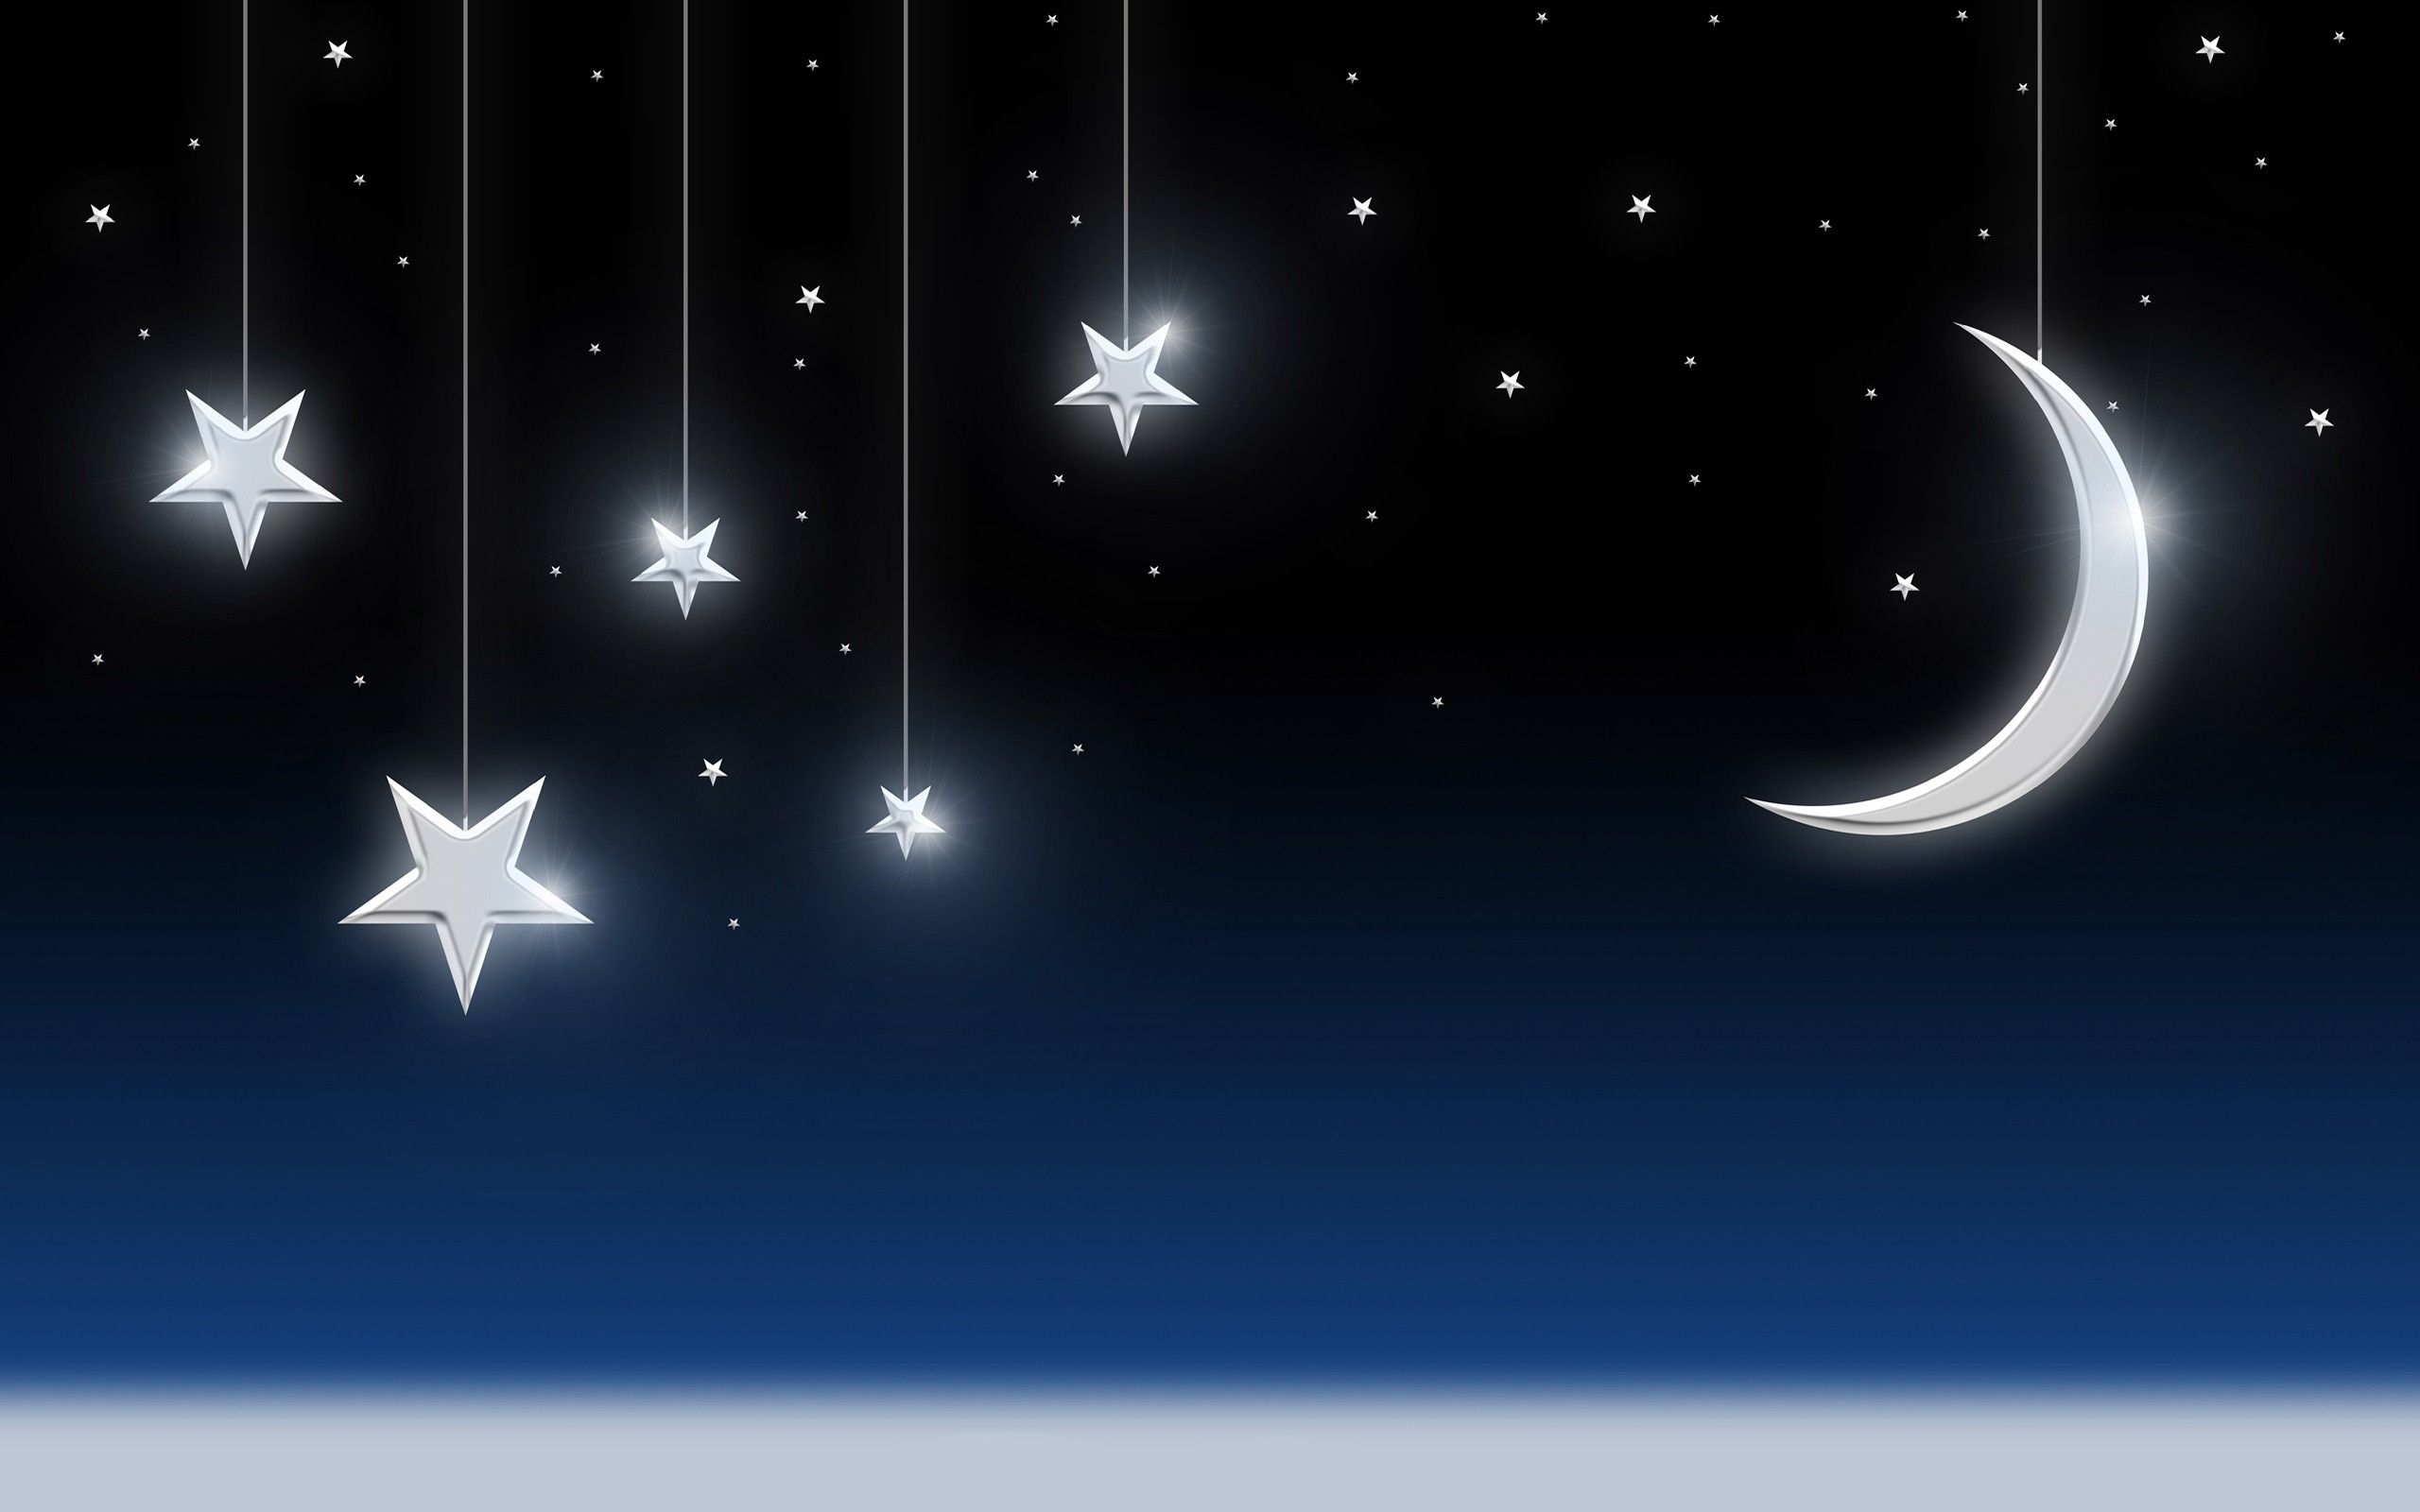 Desktop pictures of stars and moons download